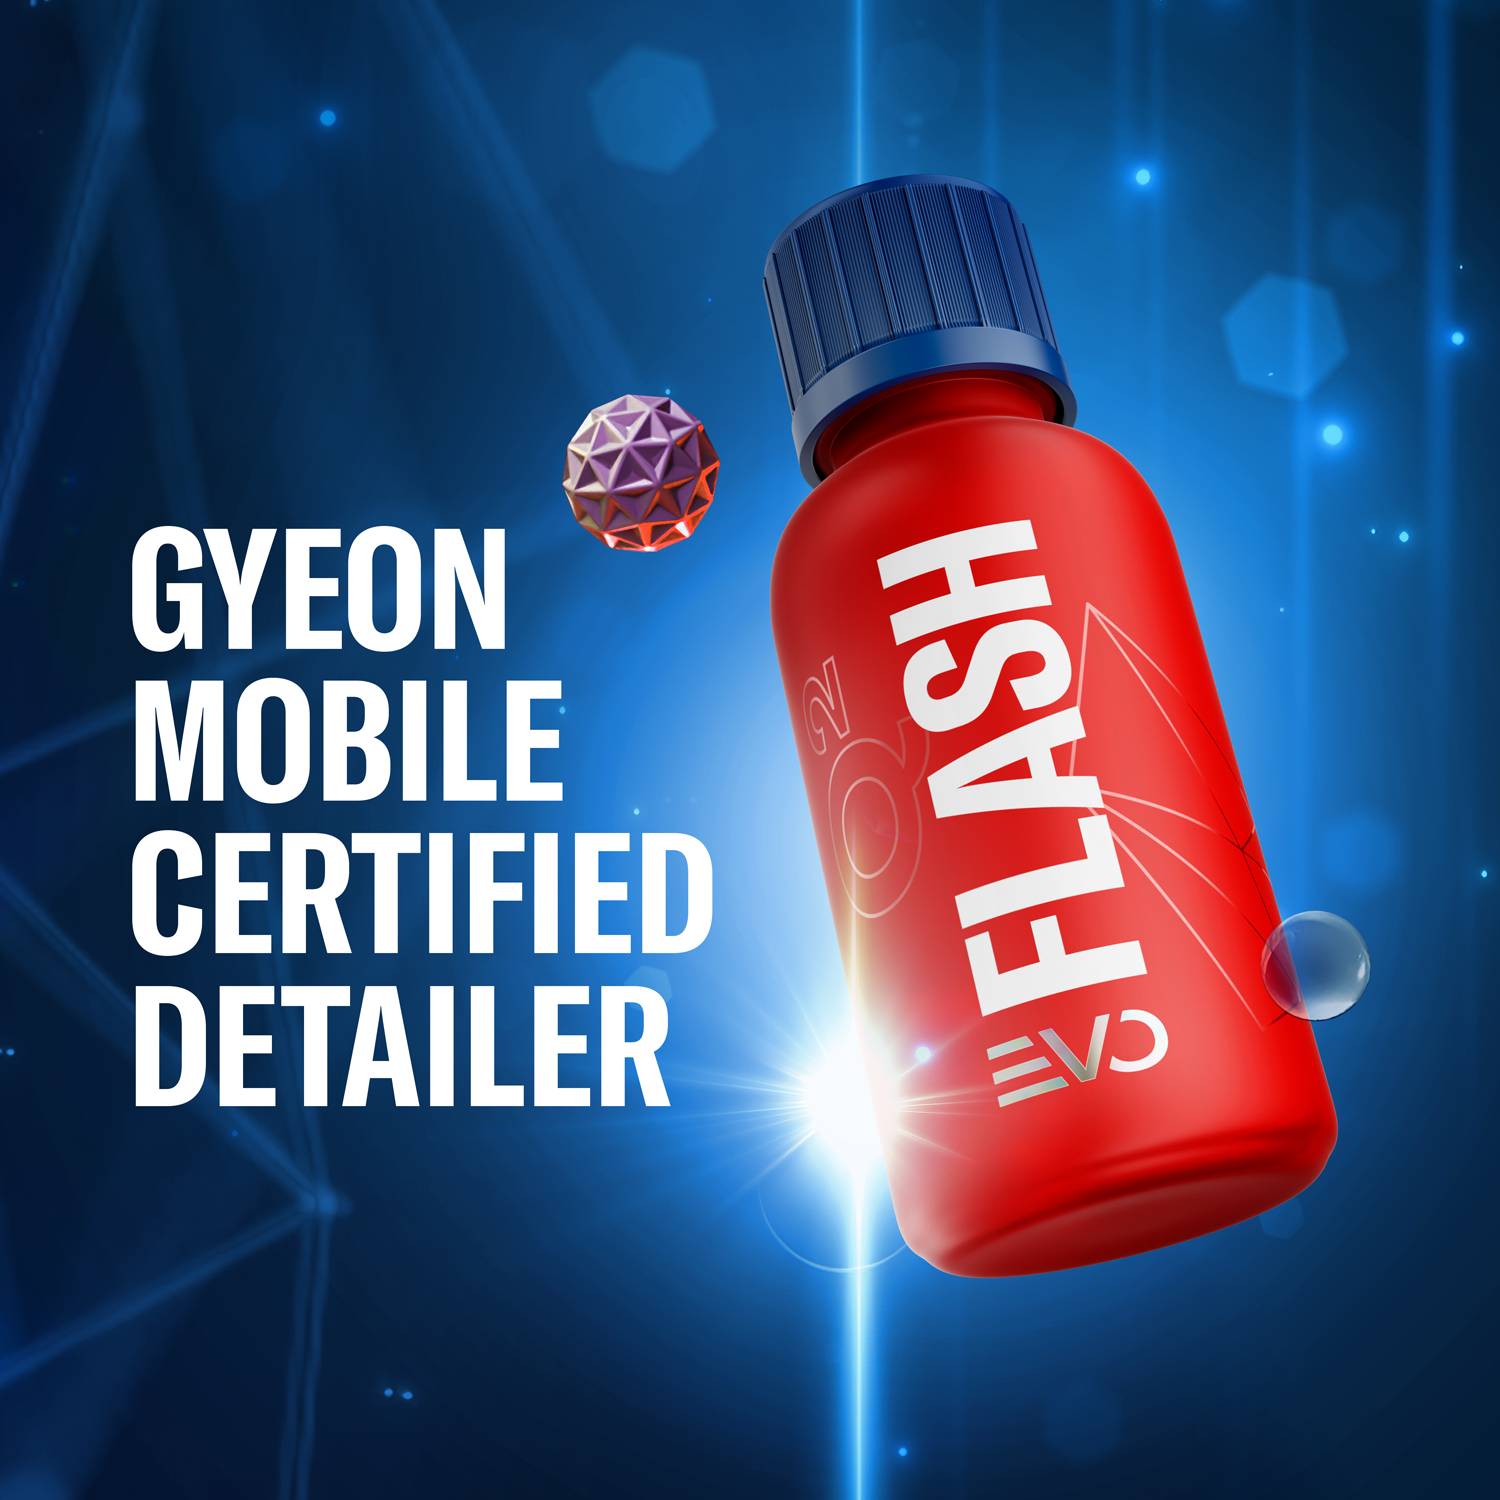 A red bottle of gyeon mobile certified detailer